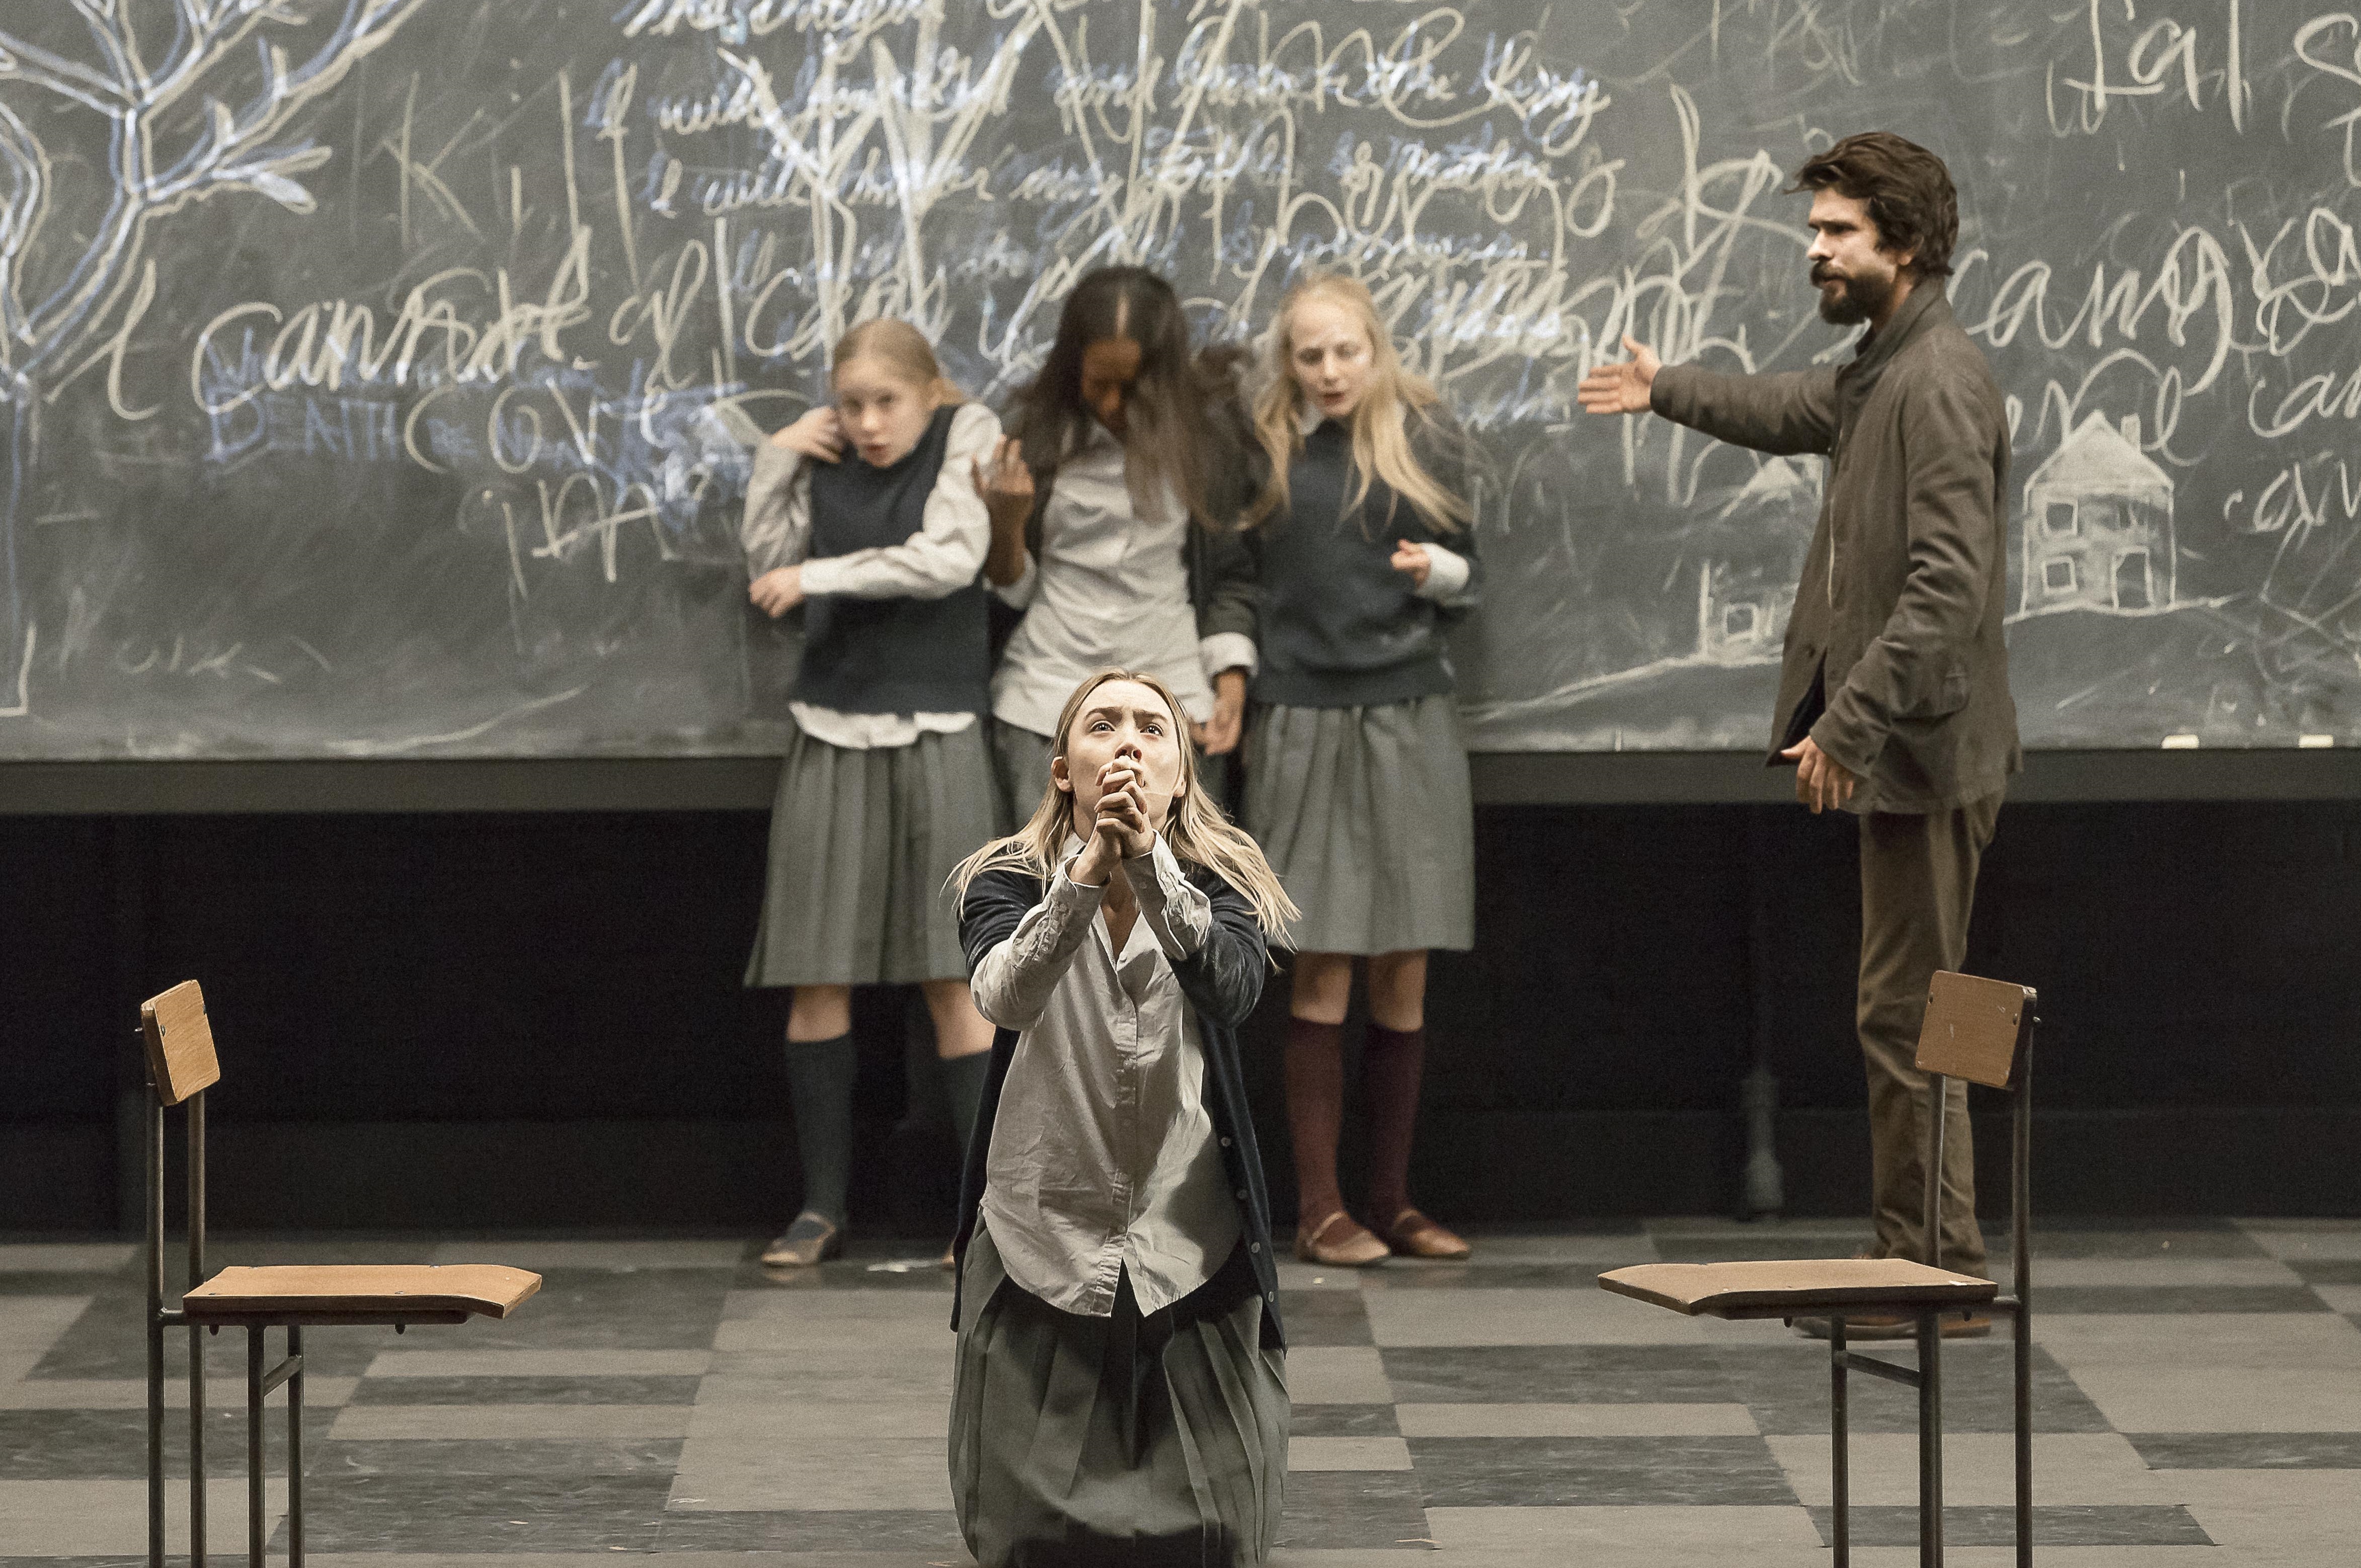 Saoirse Ronan (foreground) and Elizabeth Teeter, Ashlei Sharpe Chestnut, Erin Wilhelmi and Ben Wishaw (background) in a scene from "The Crucible," directed by Ivo van Hove (Jan Versweyveld)